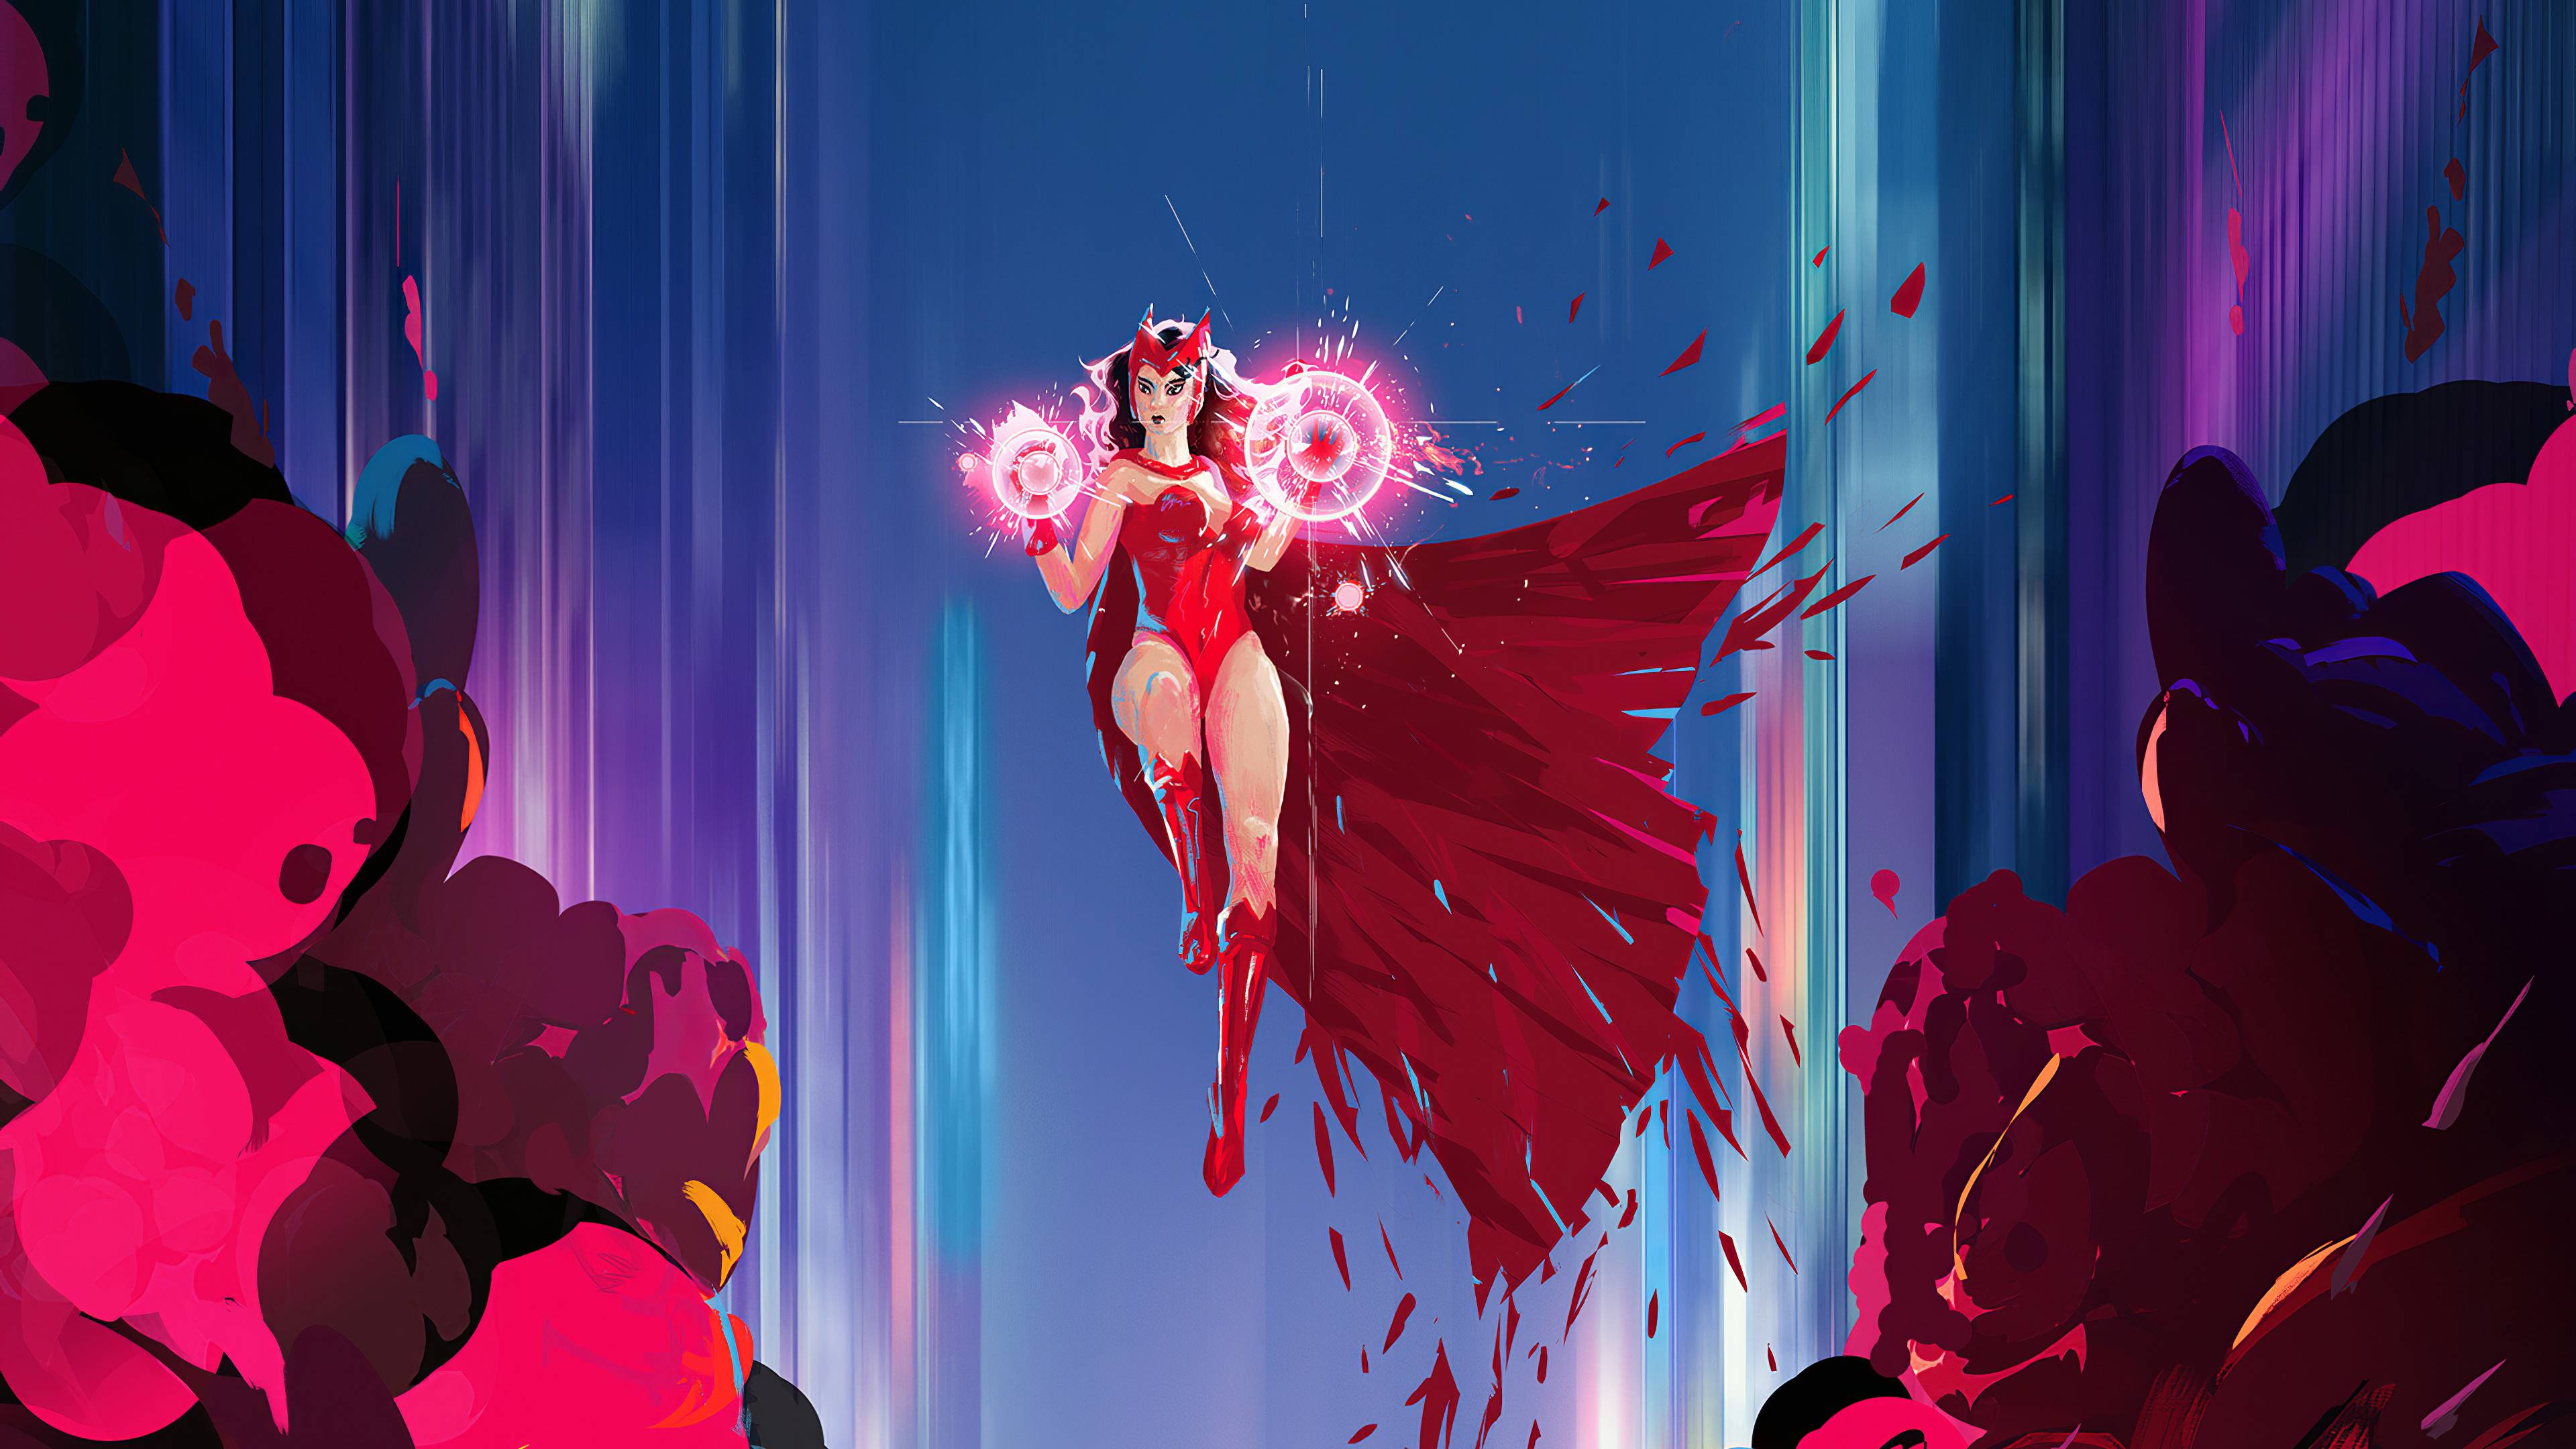 Scarlet Witch Art Wallpaper Free Scarlet Witch Art Background